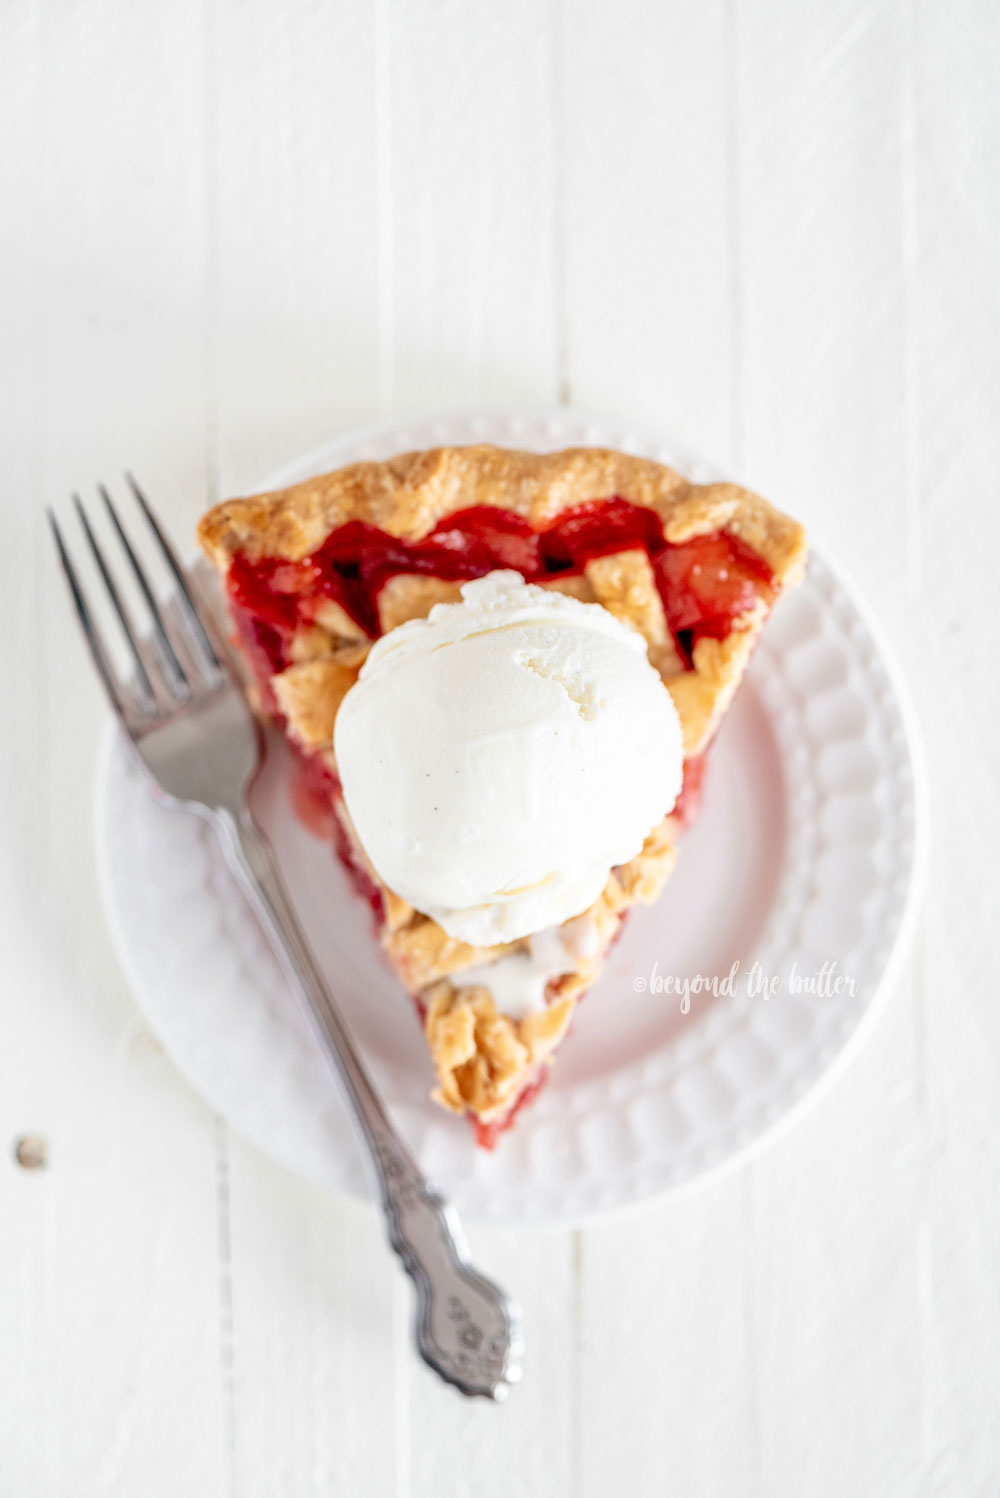 Strawberry Rhubarb Pie Filling Recipe | All Images © Beyond the Butter, LLC